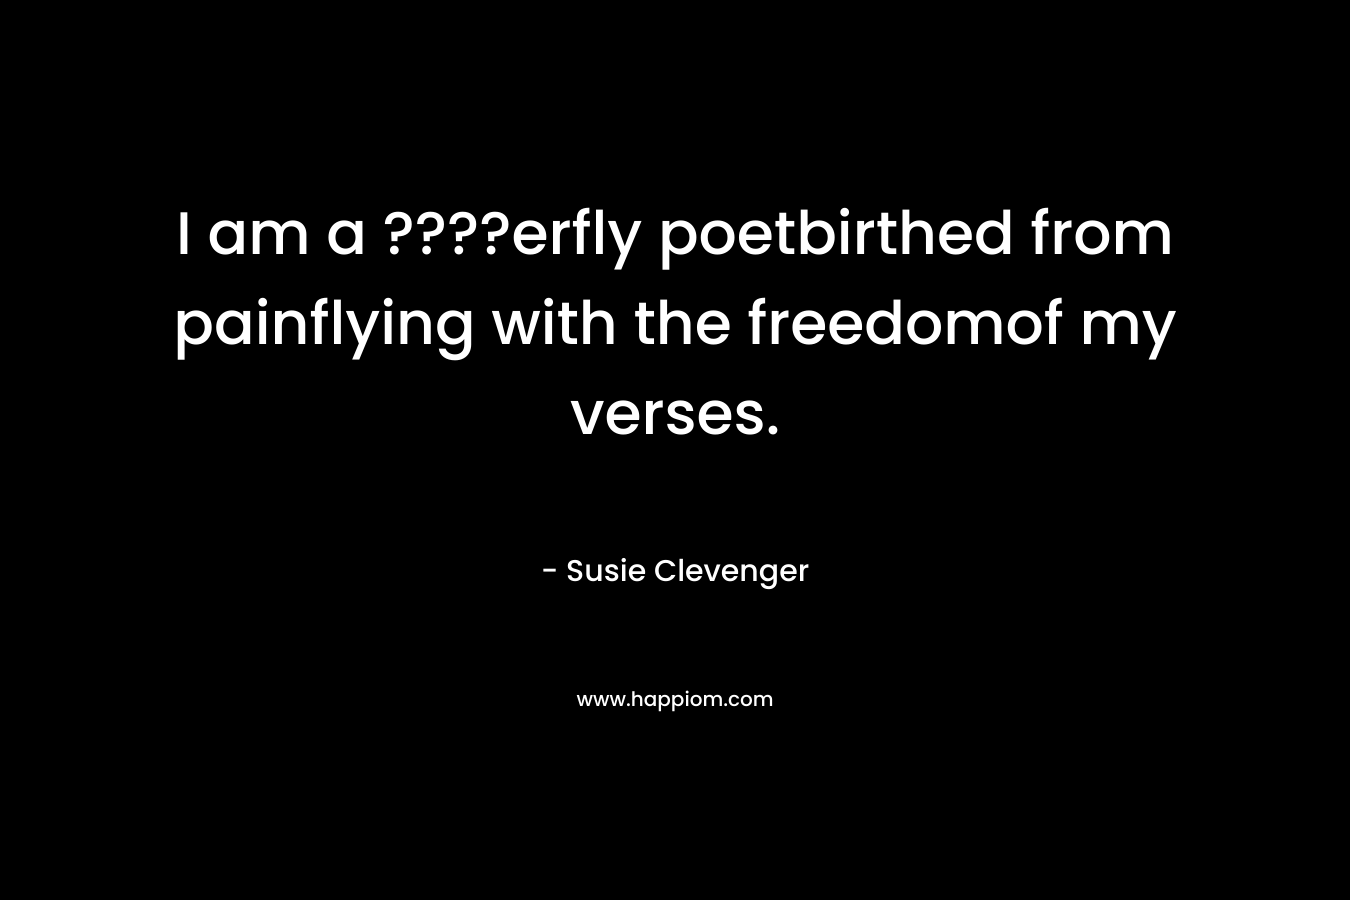 I am a ????erfly poetbirthed from painflying with the freedomof my verses. – Susie Clevenger